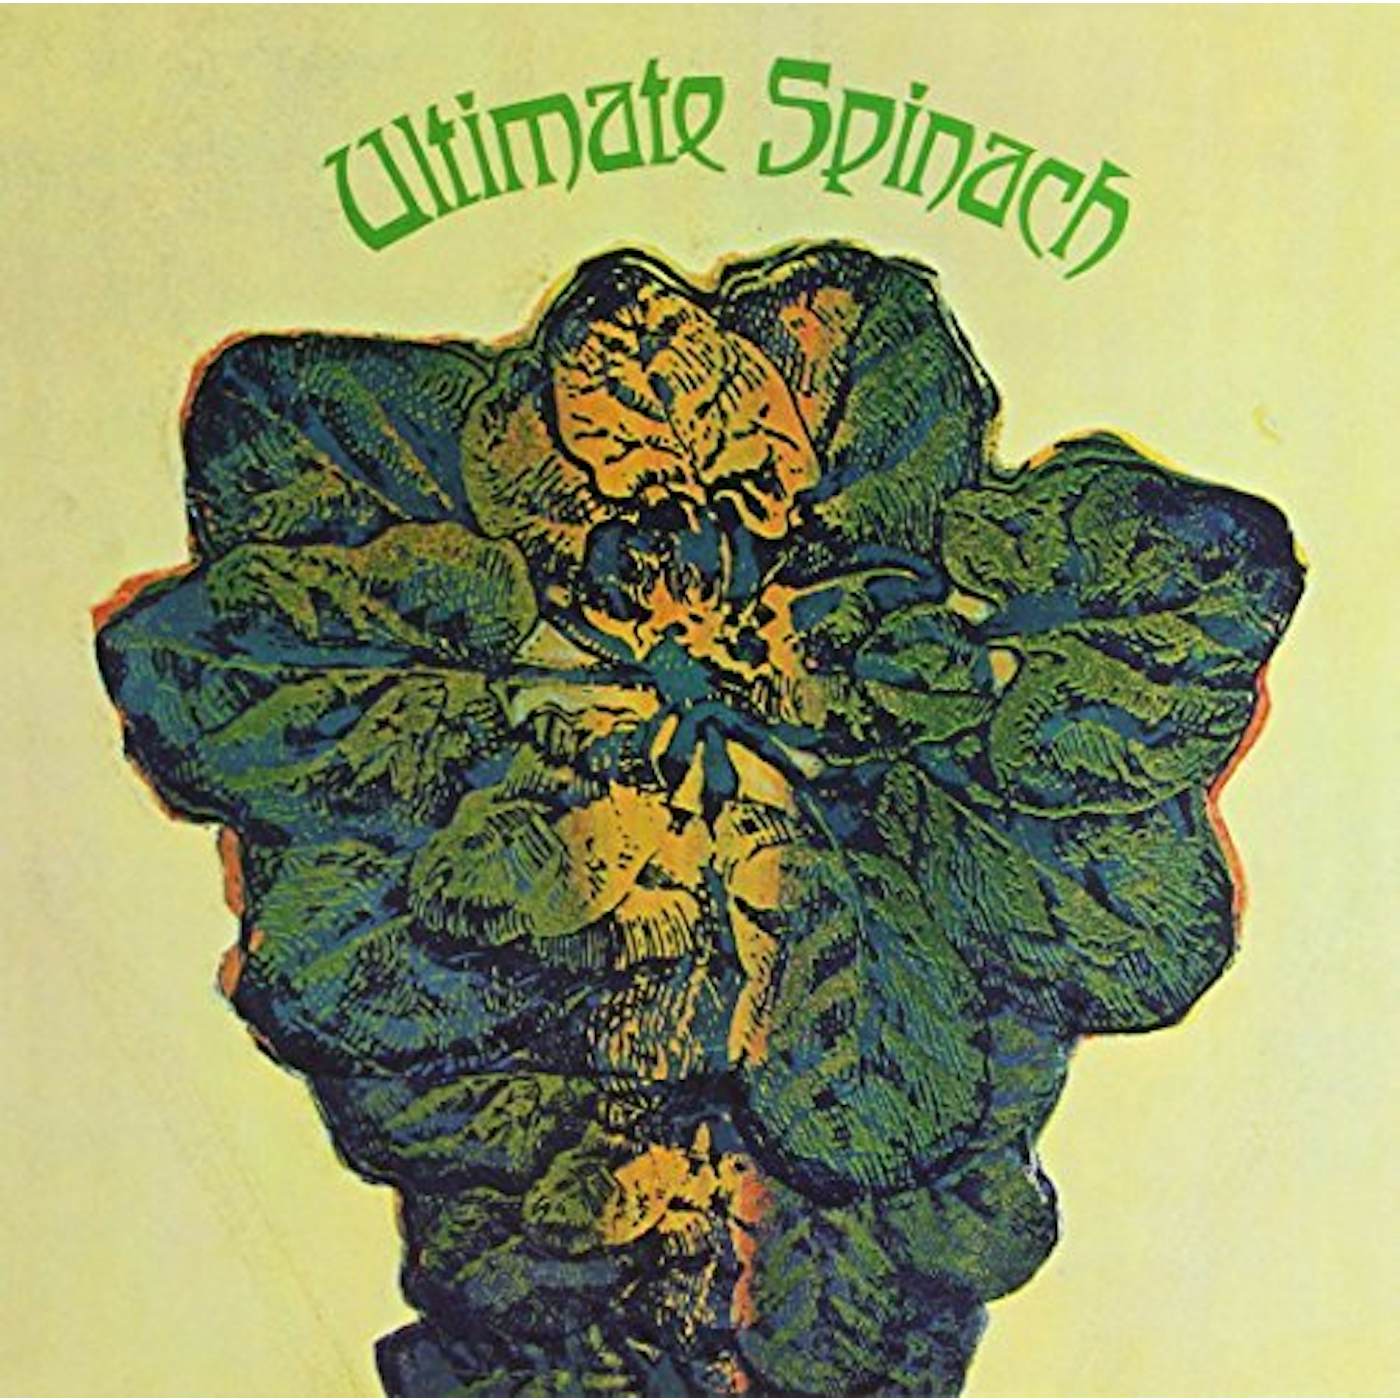 Ultimate Spinach Vinyl Record